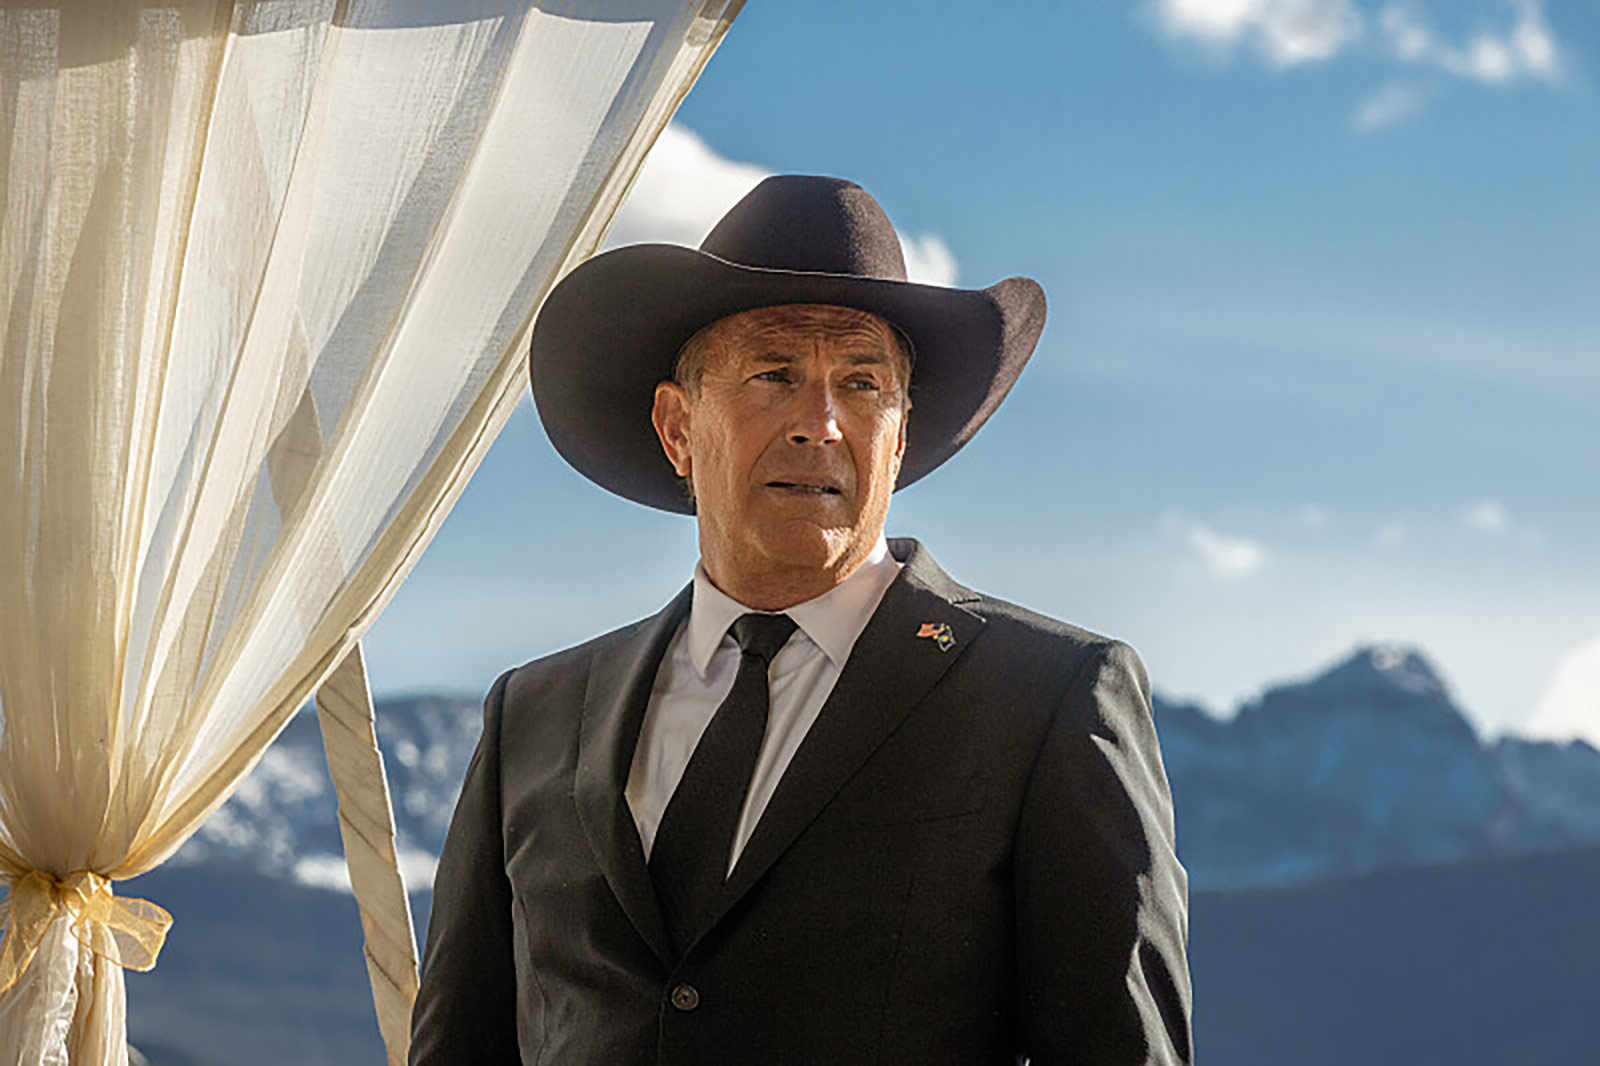 Kevin Costner on “Yellowstone”